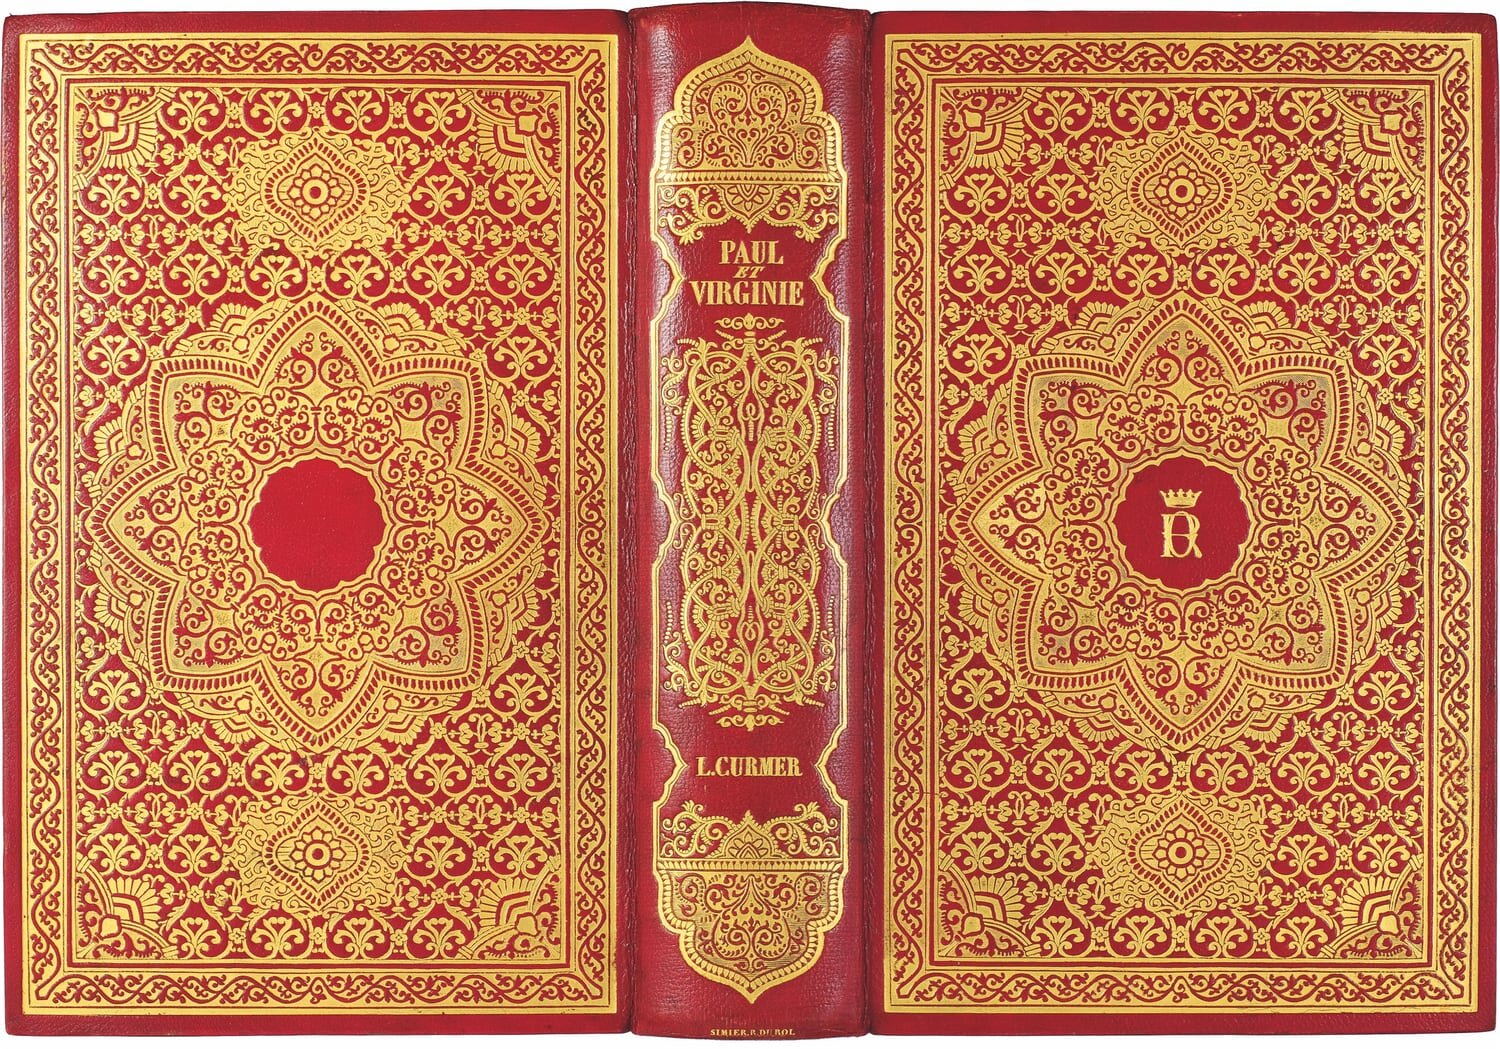  A publisher’s binding  à l’orientale  in red morocco that used to belong to Robert d’Orléans, the Duke of Chartres [no. 50].  